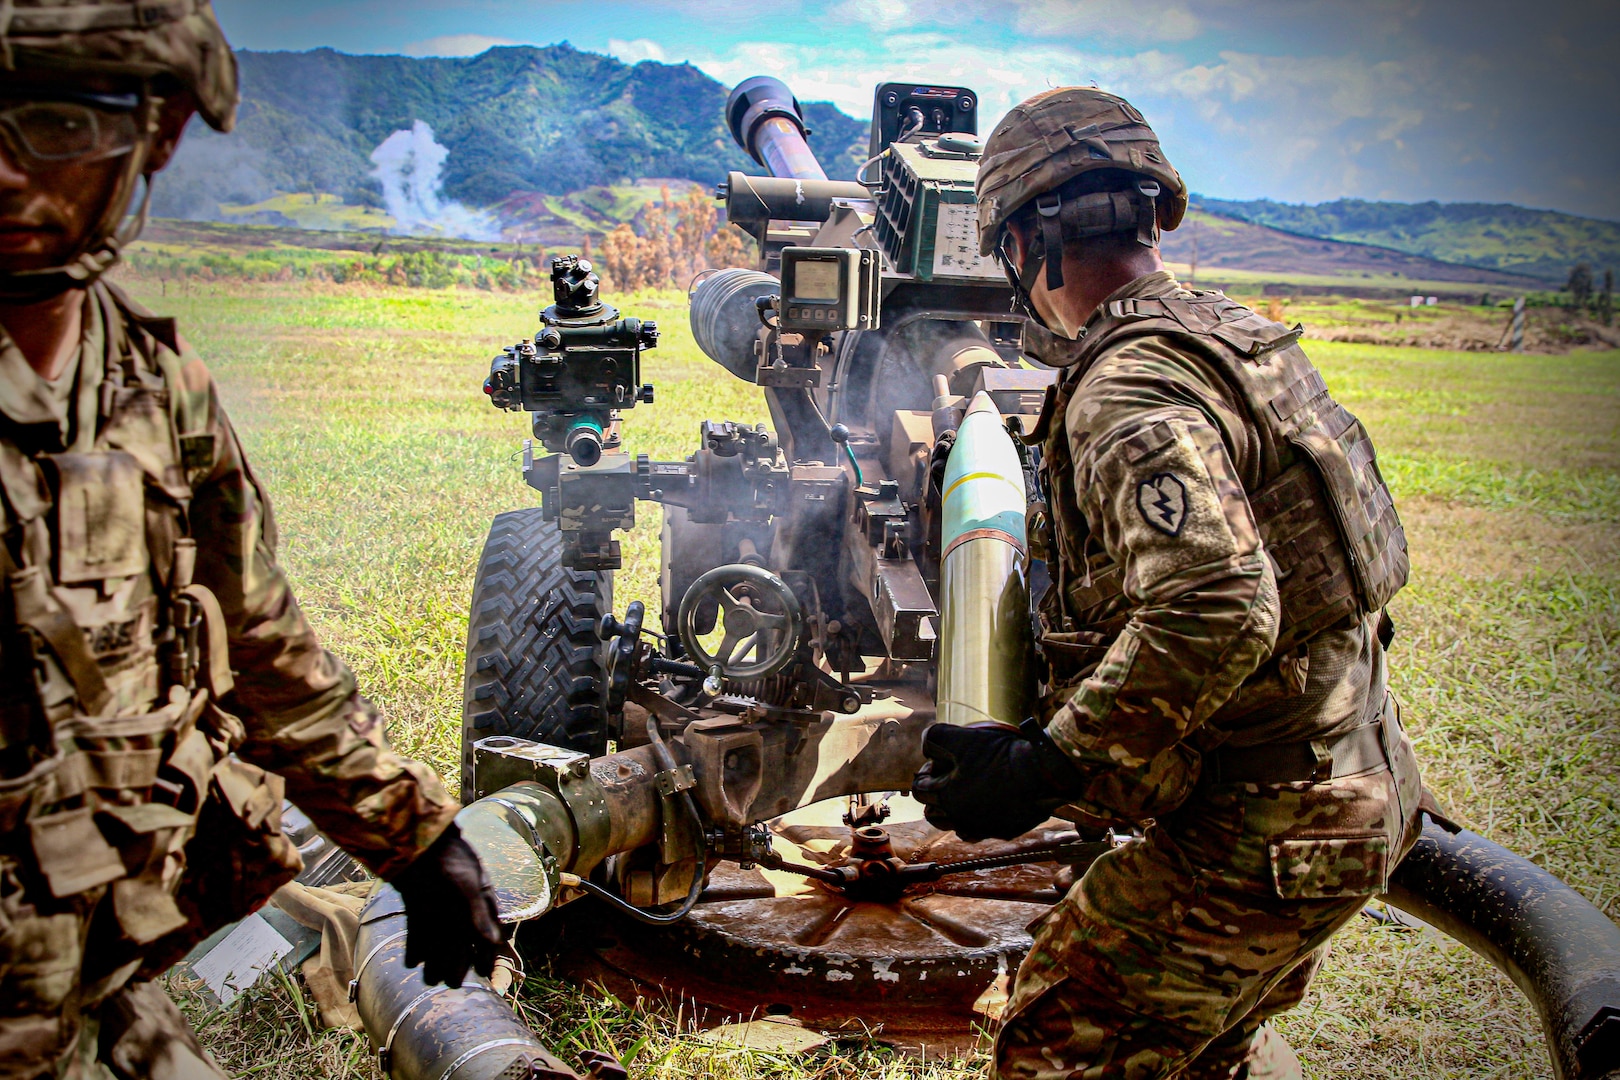 Soldiers with 2nd Battalion, 11th Field Artillery, 25th Infantry Division work with M119 Howitzers to enhance their basic artillery skills on Schofield Barracks, Hawaii, June 14, 2020. (Photo by 1st Lt. Stephanie Snyder, USA)